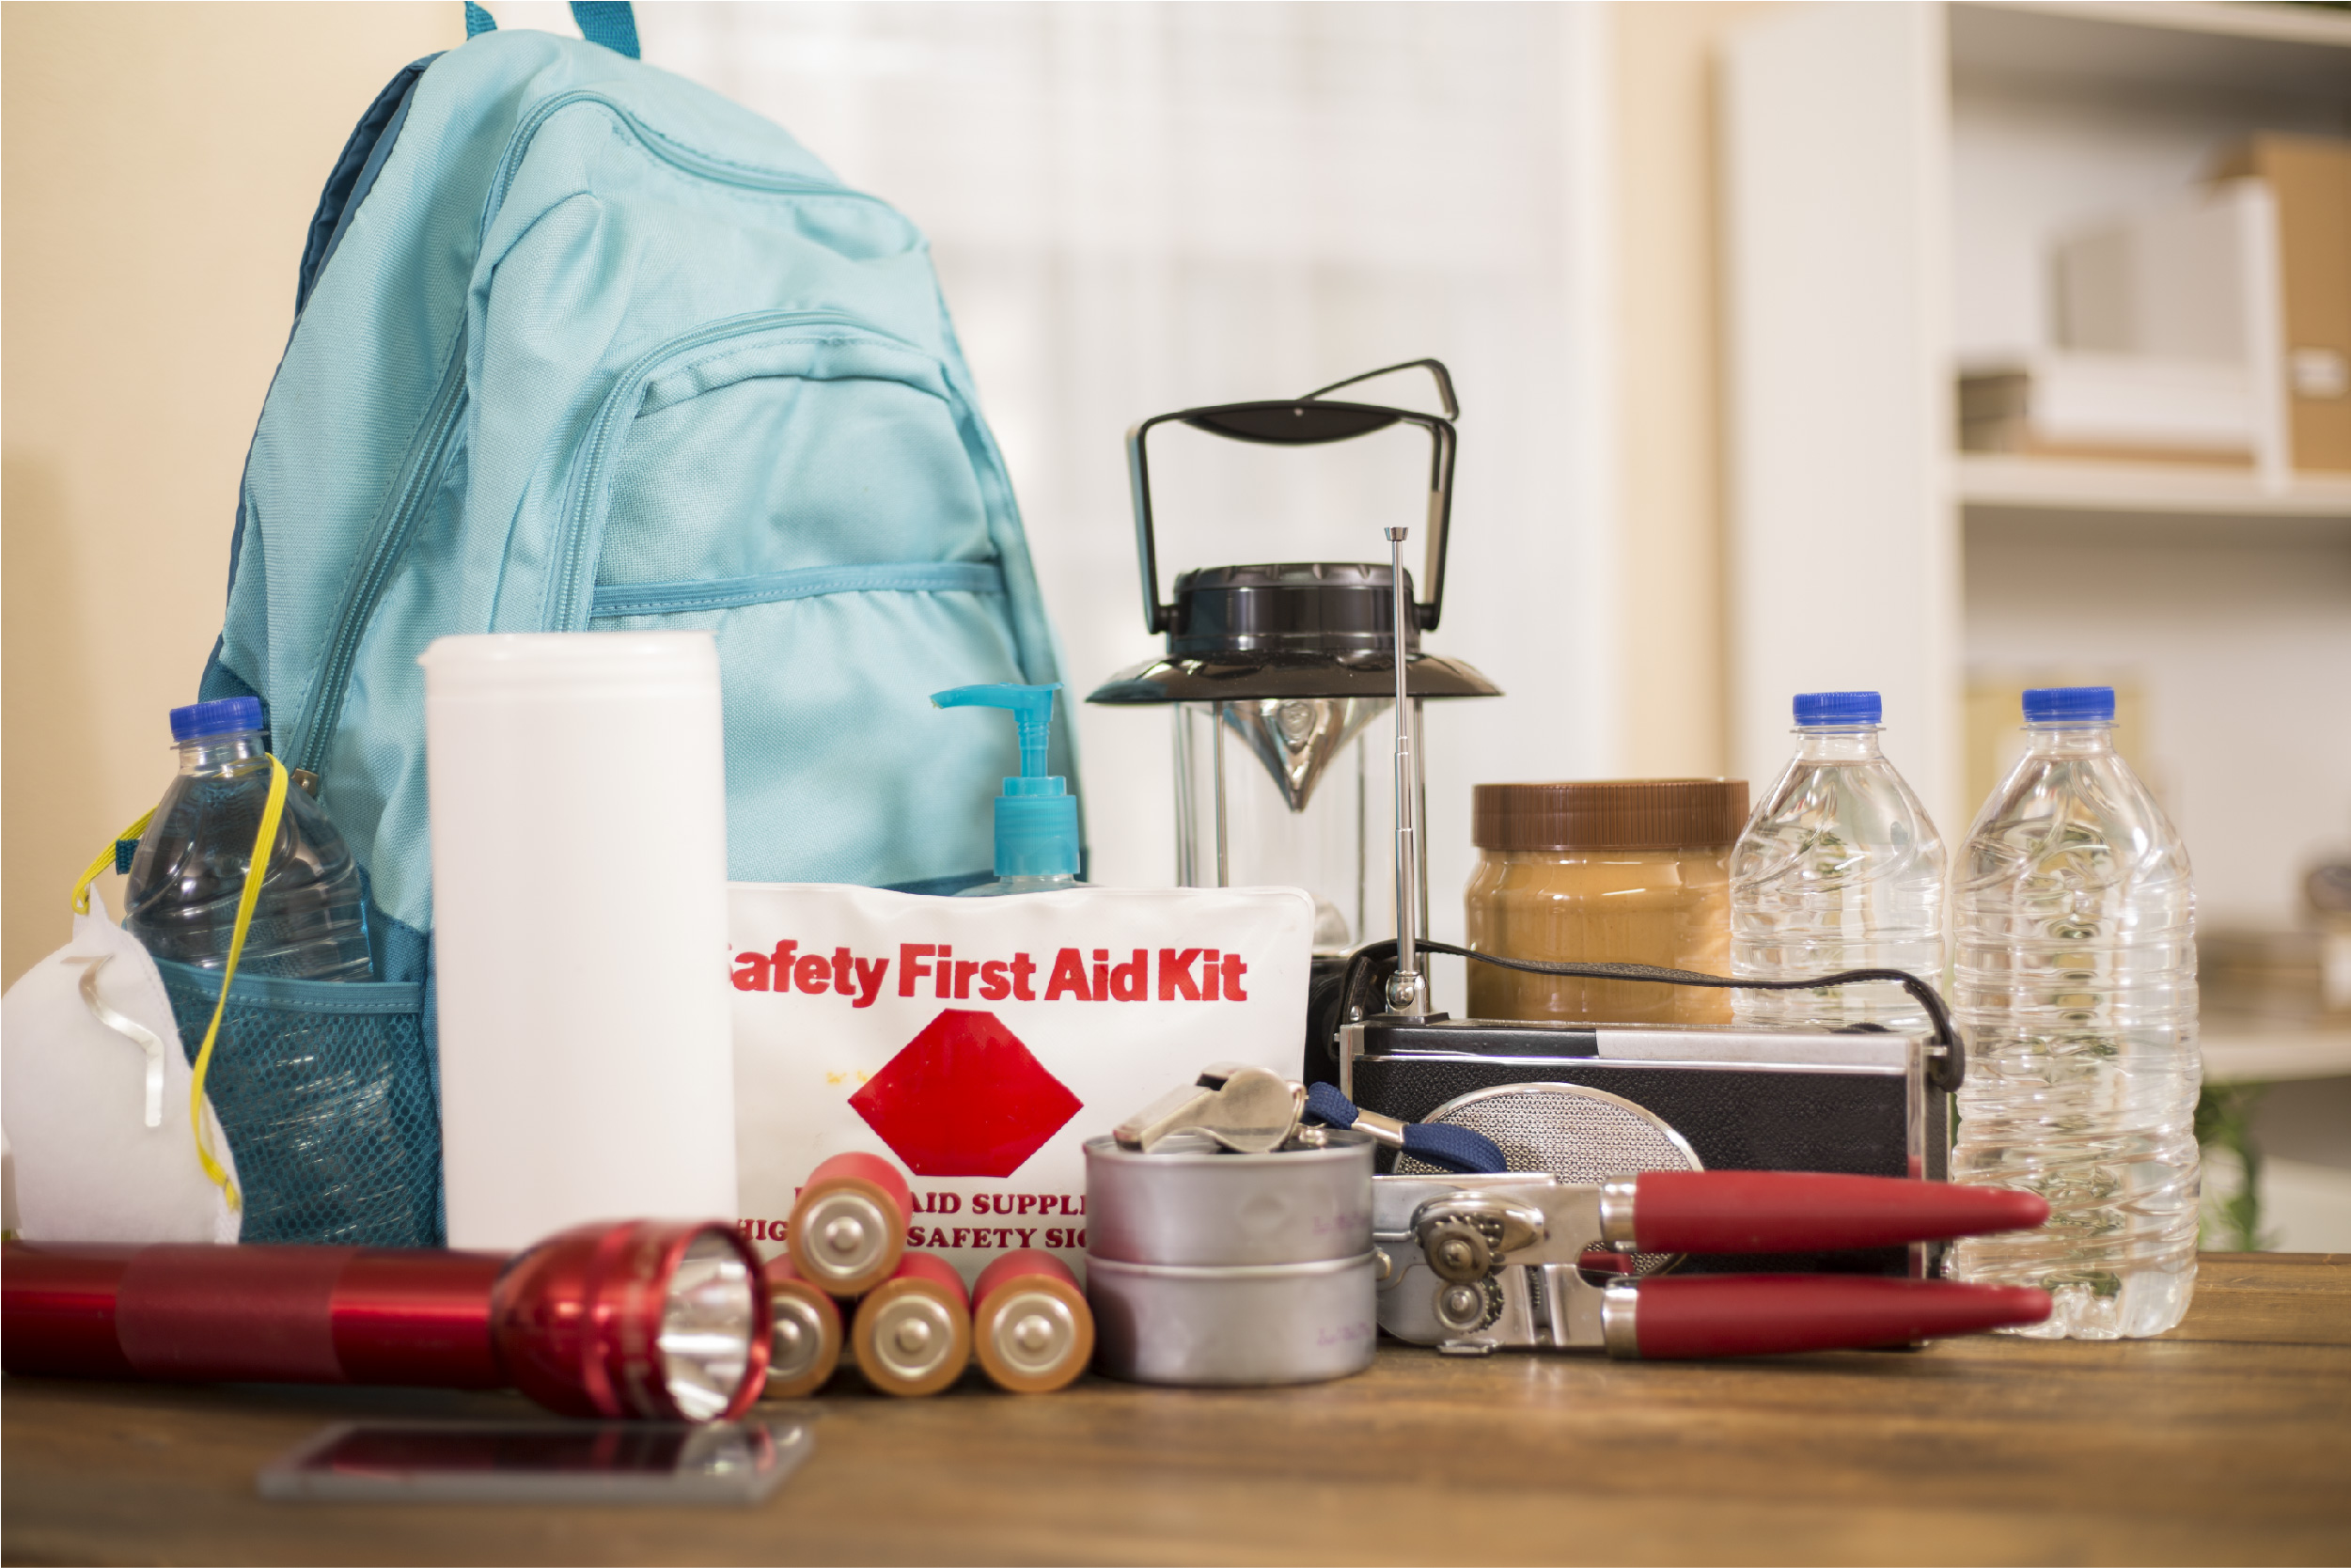 A disaster preparedness kit, including first aid kit, bottled water, a flashlight, and batteries,